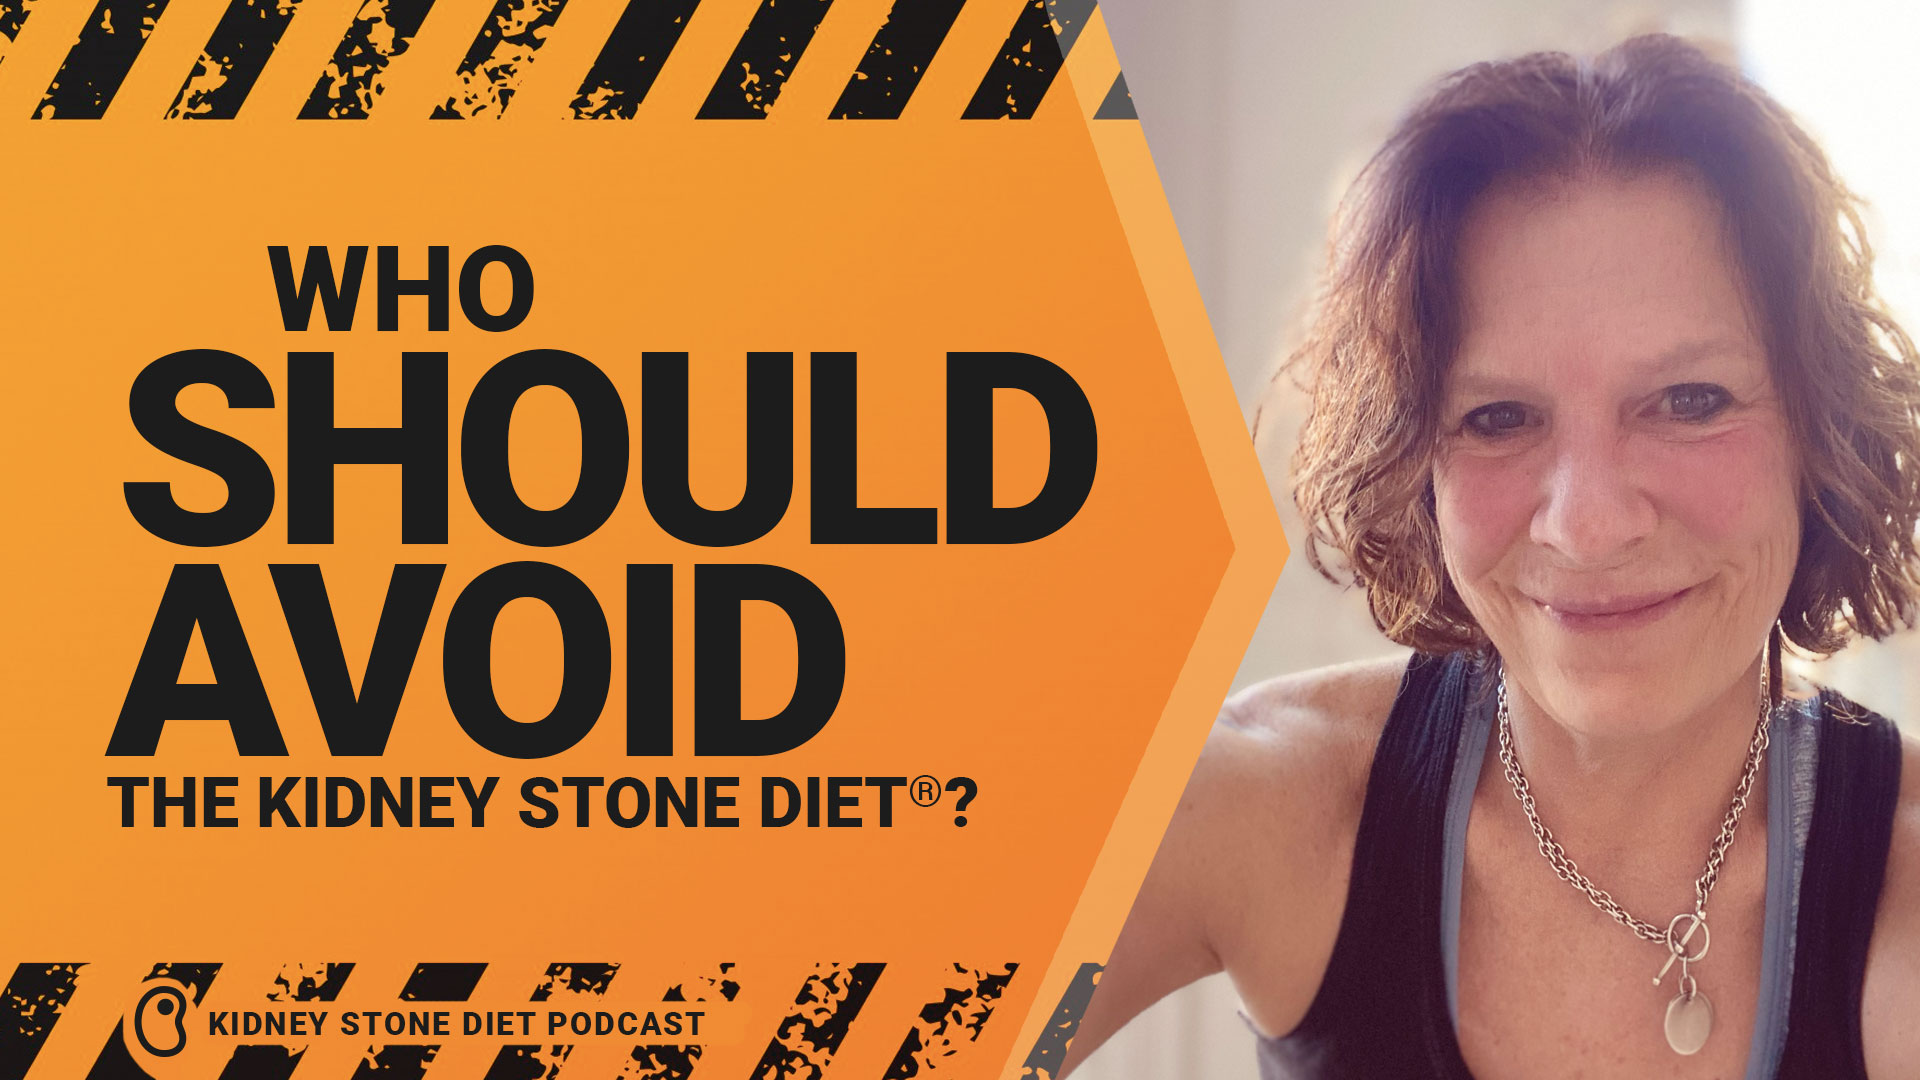 Who Should Avoid the Kidney Stone Diet